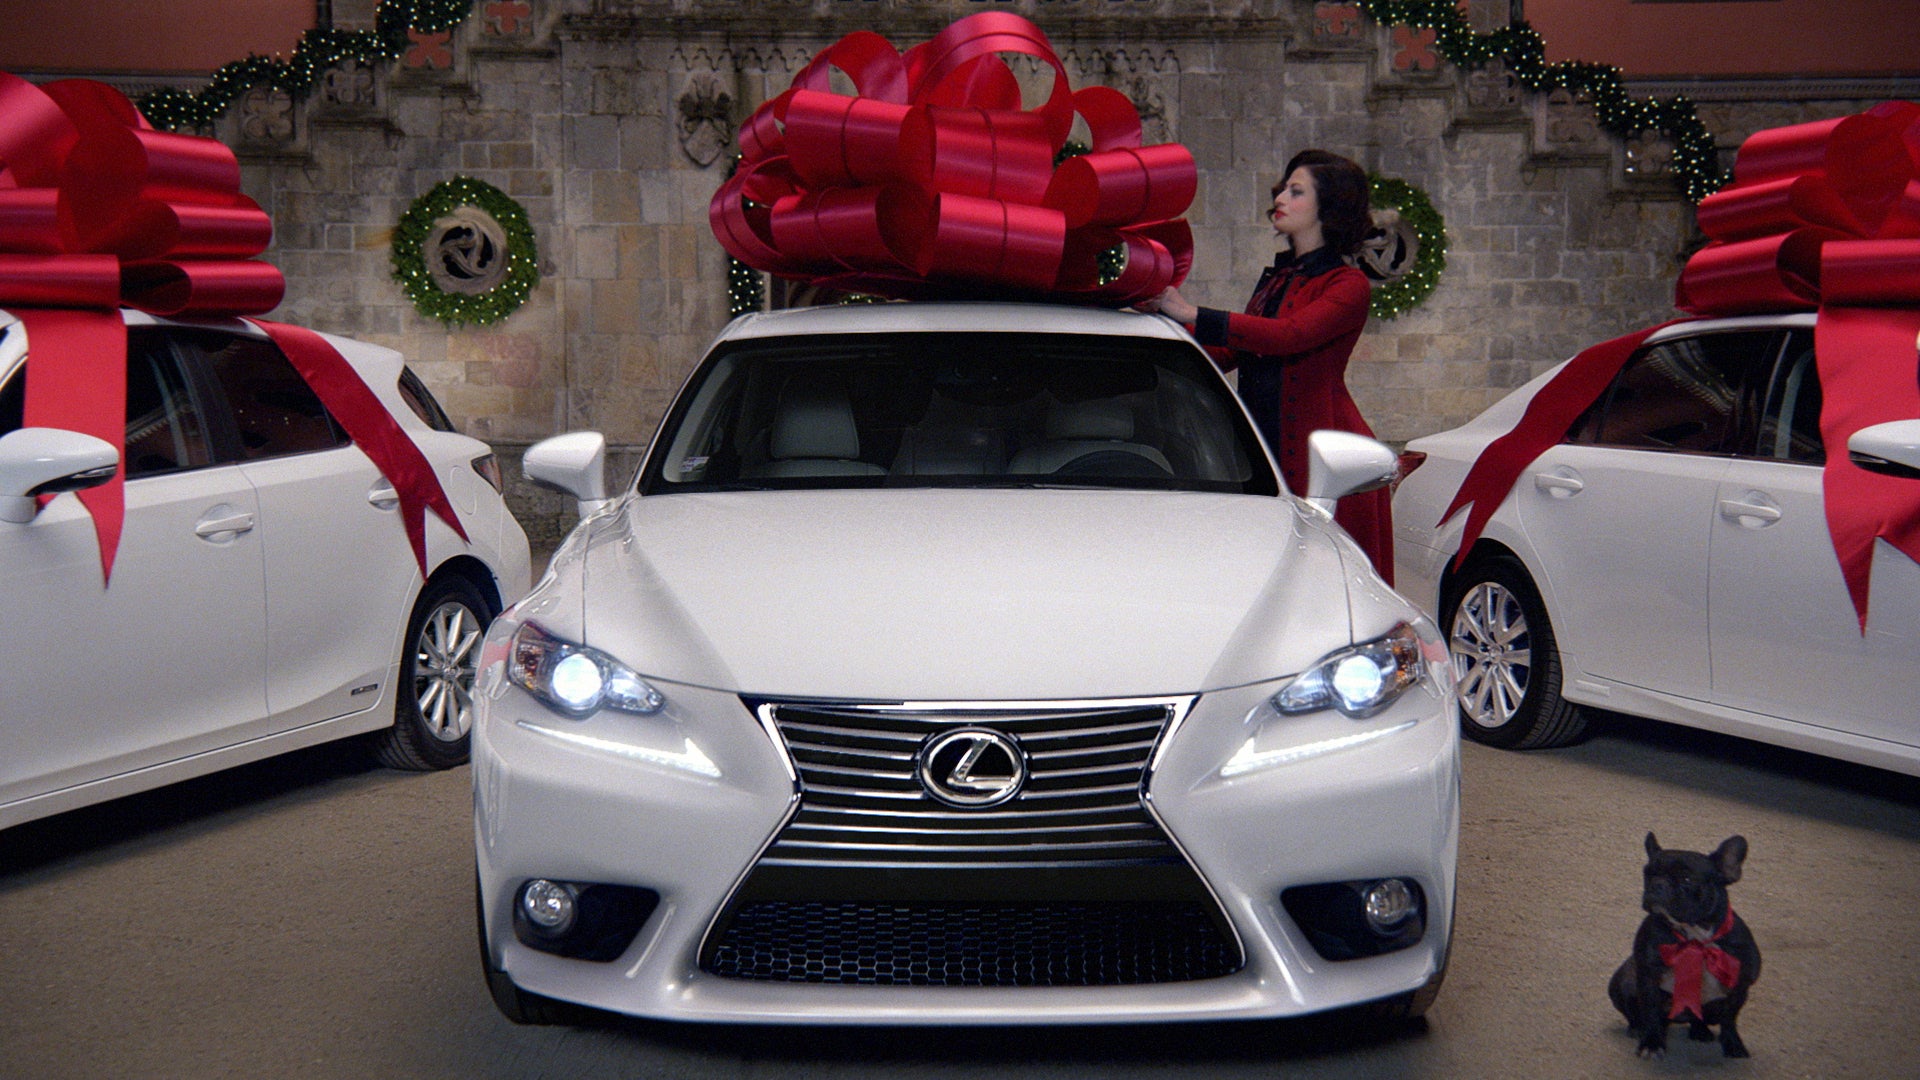 Who buys and sells the giant car bows from the Lexus car